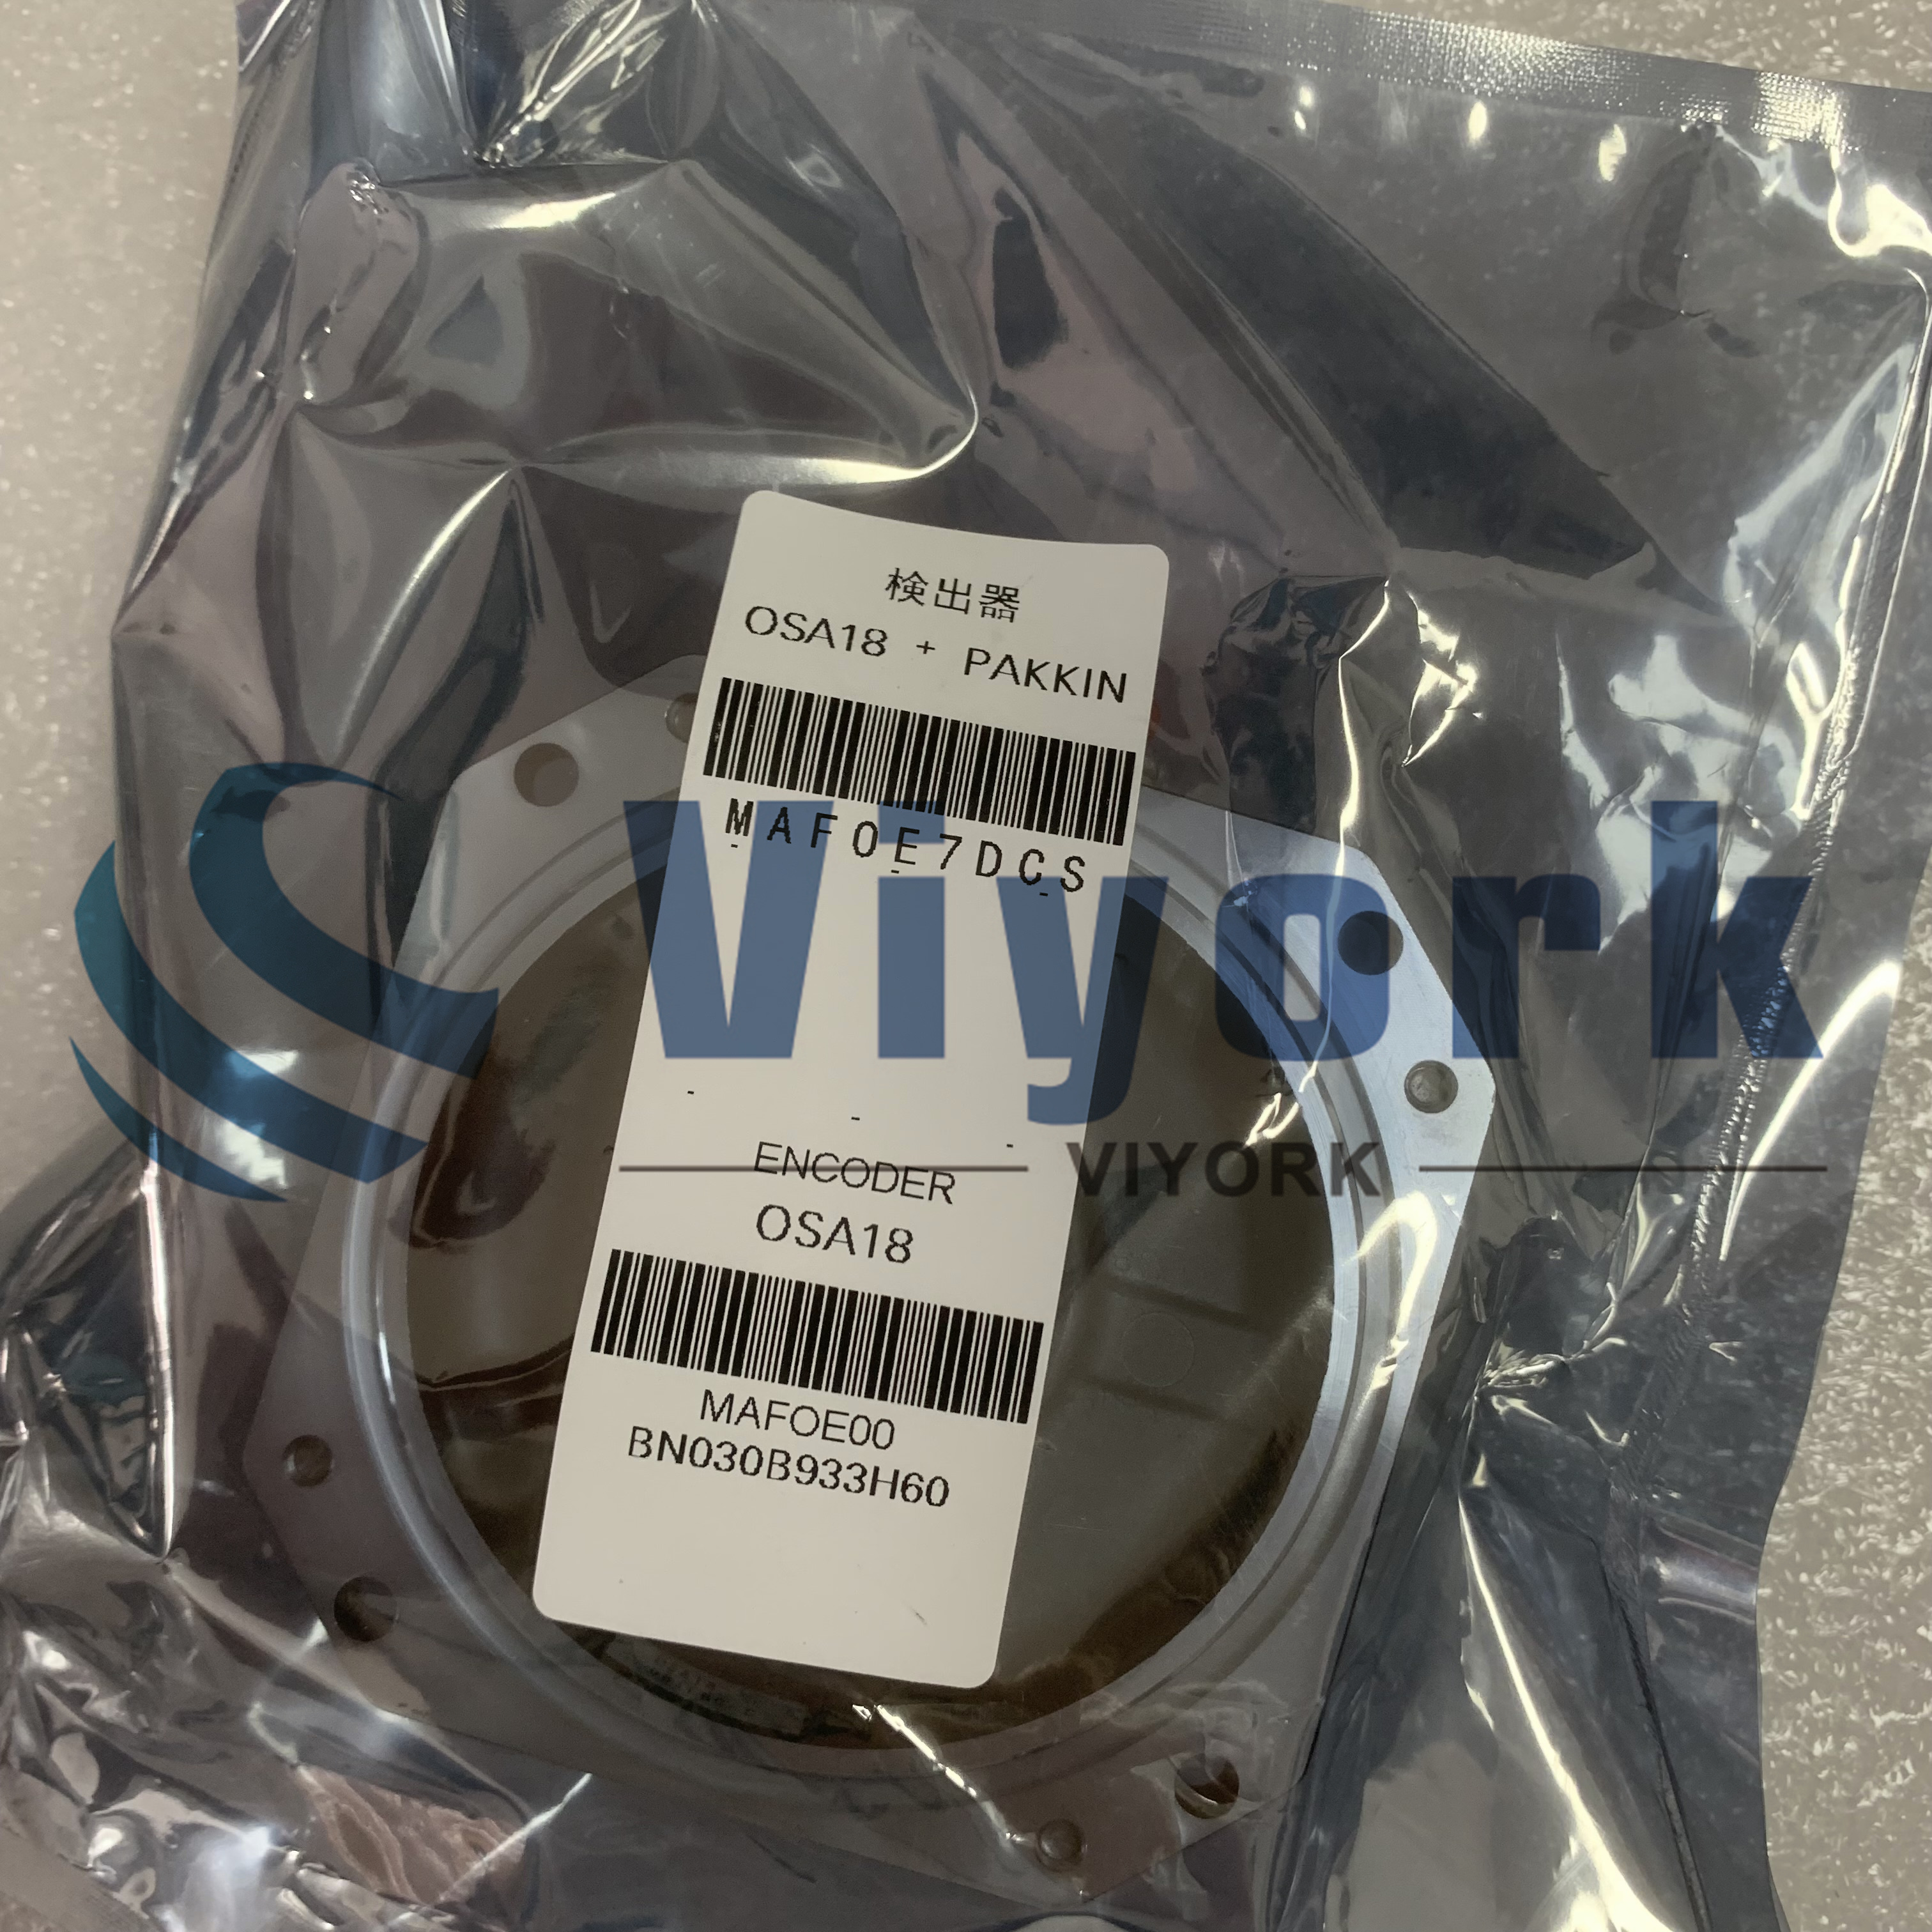 Mitsubishi OSA18 ABSOLUTE ENCODER FOR SERVO DEVICES NEW